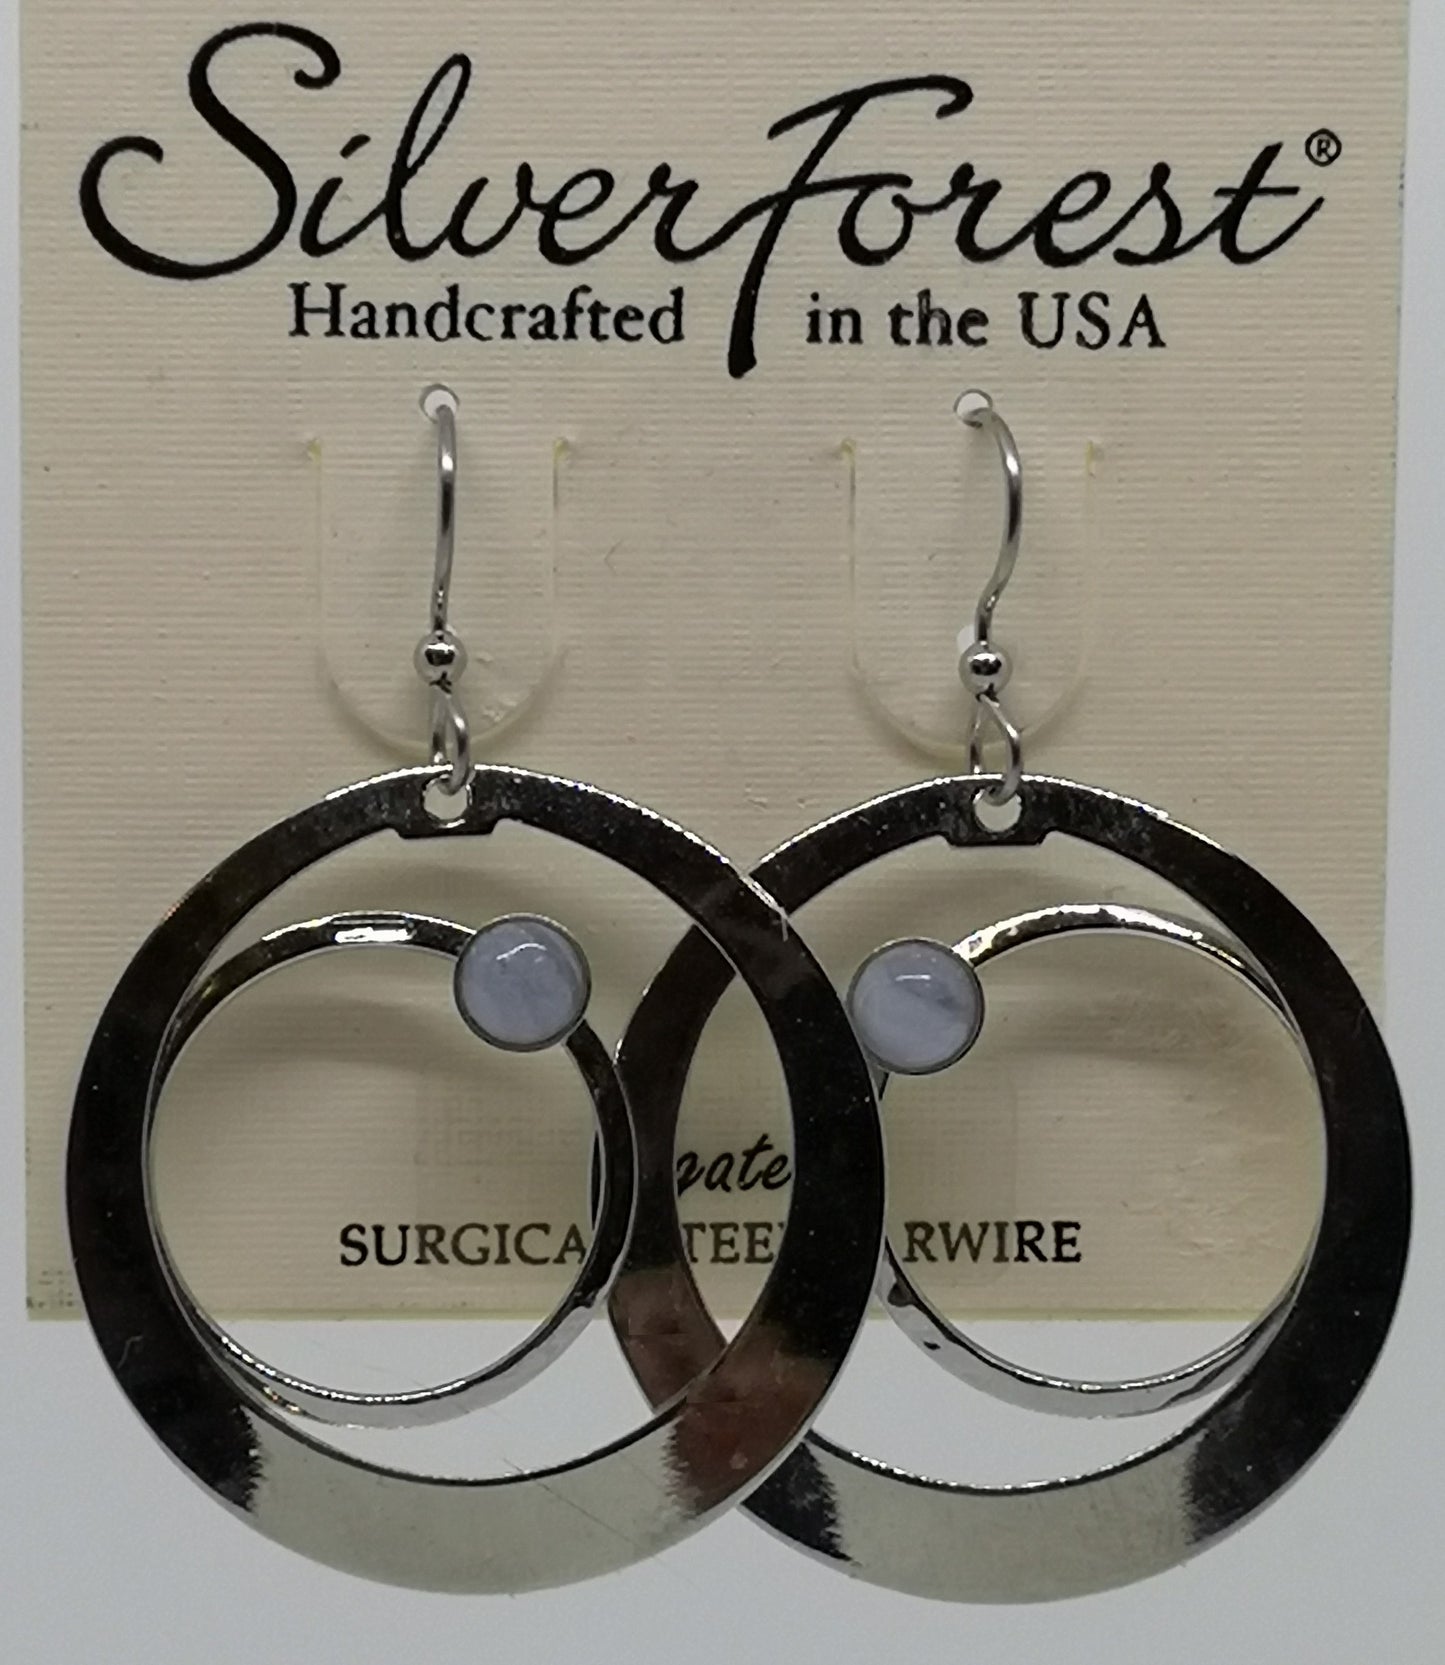 Silver forest surgical steel large circle Agate earrings